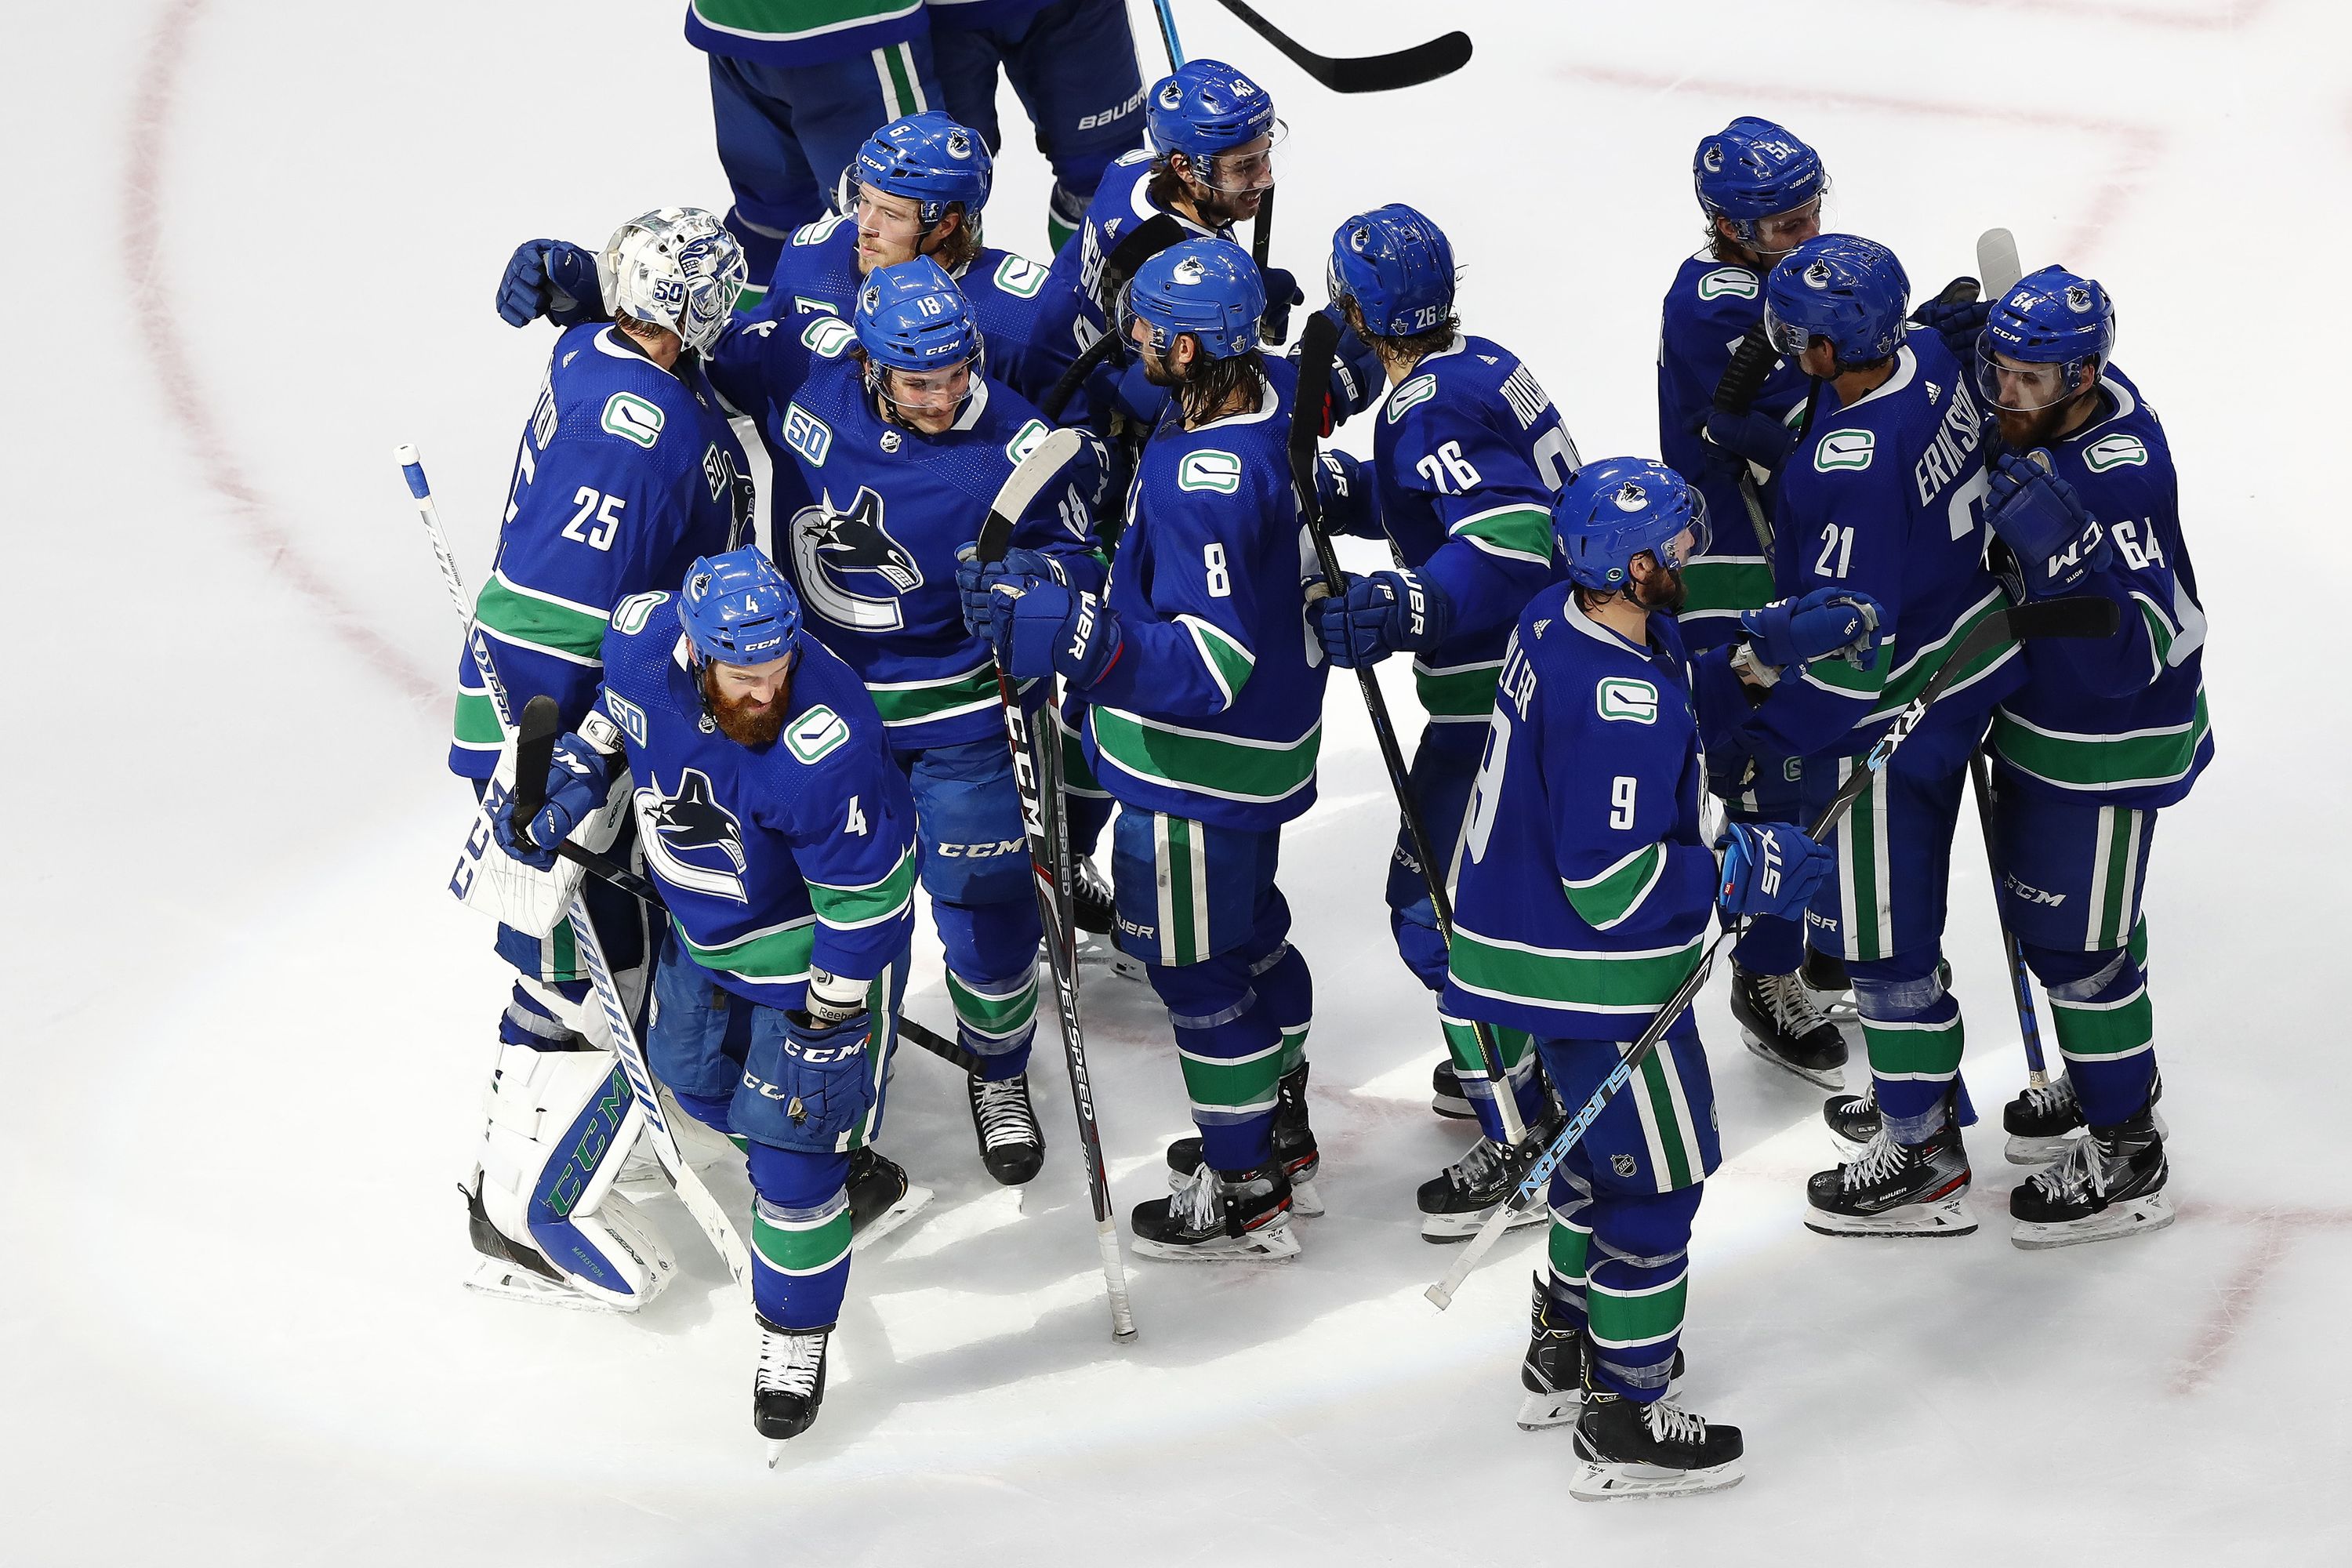 SIMMONS How did the NHL and Sportsnet mess up the Canucks TV schedule? Toronto Sun